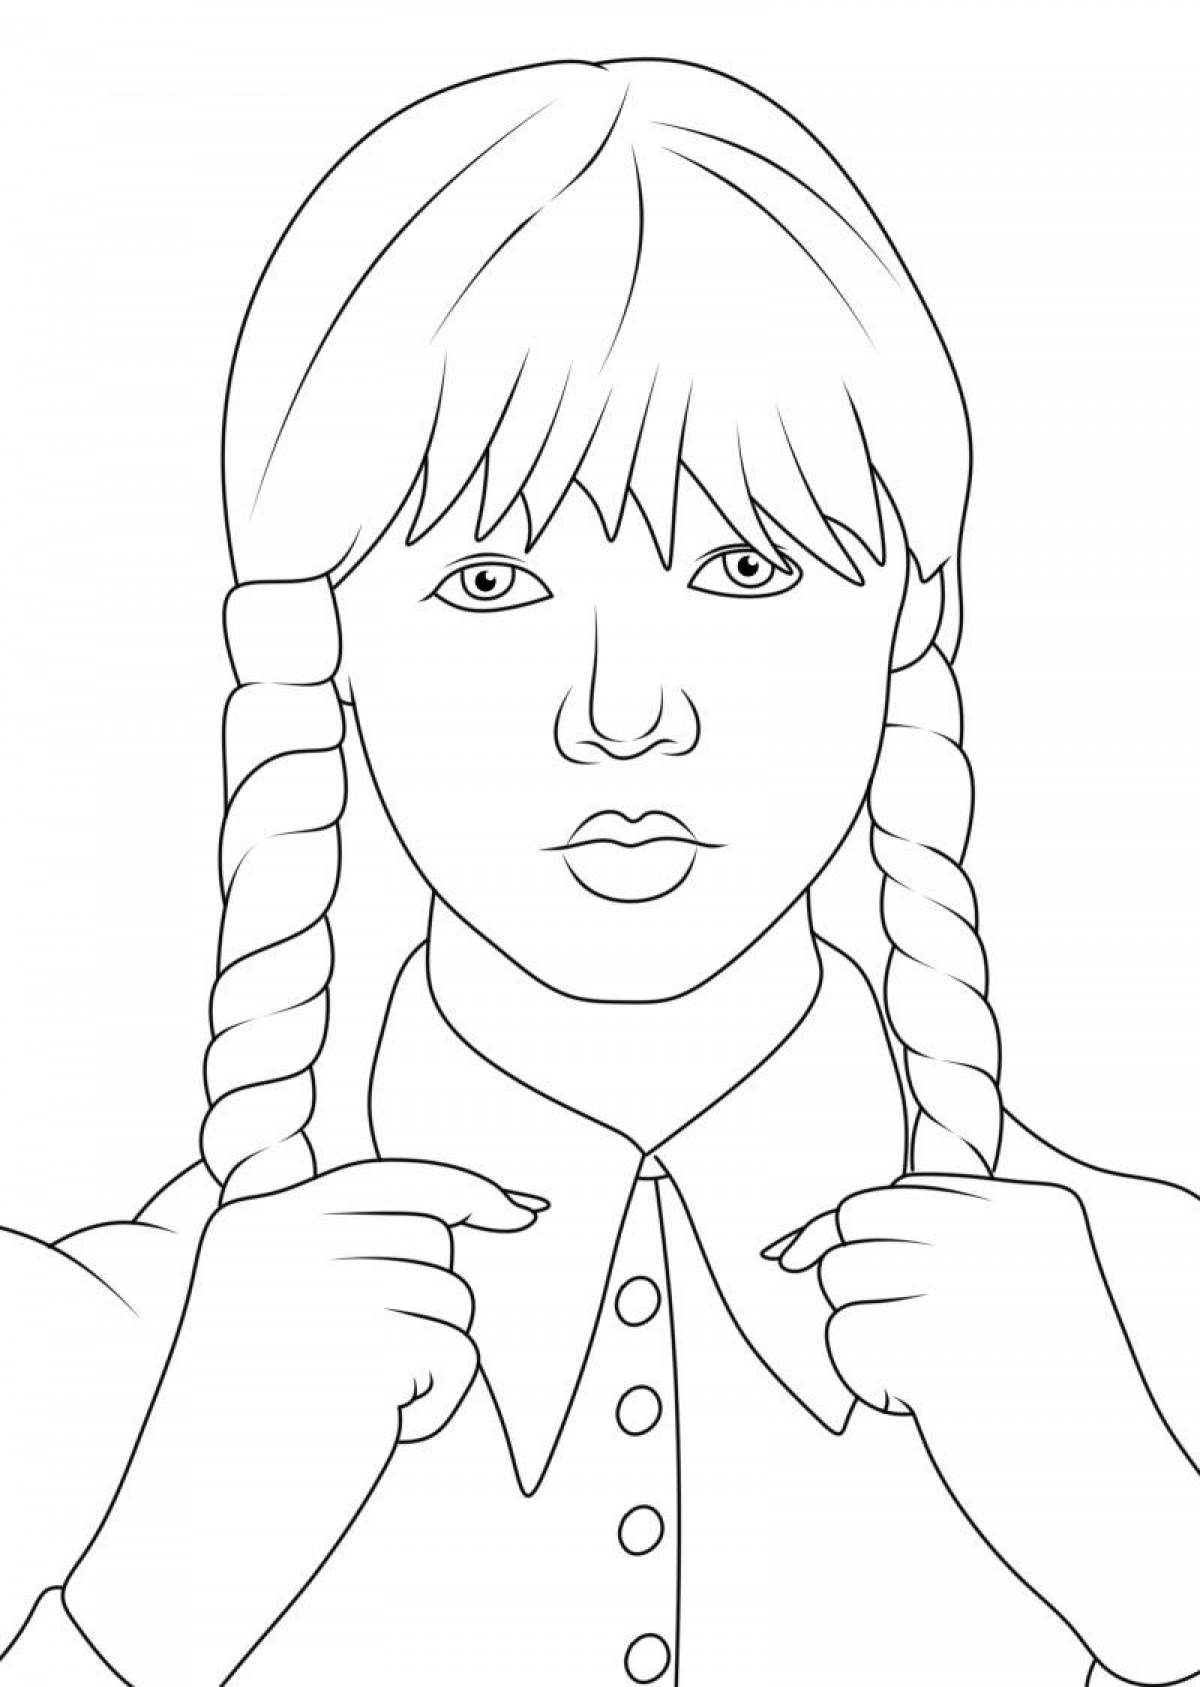 Rough environment coloring page